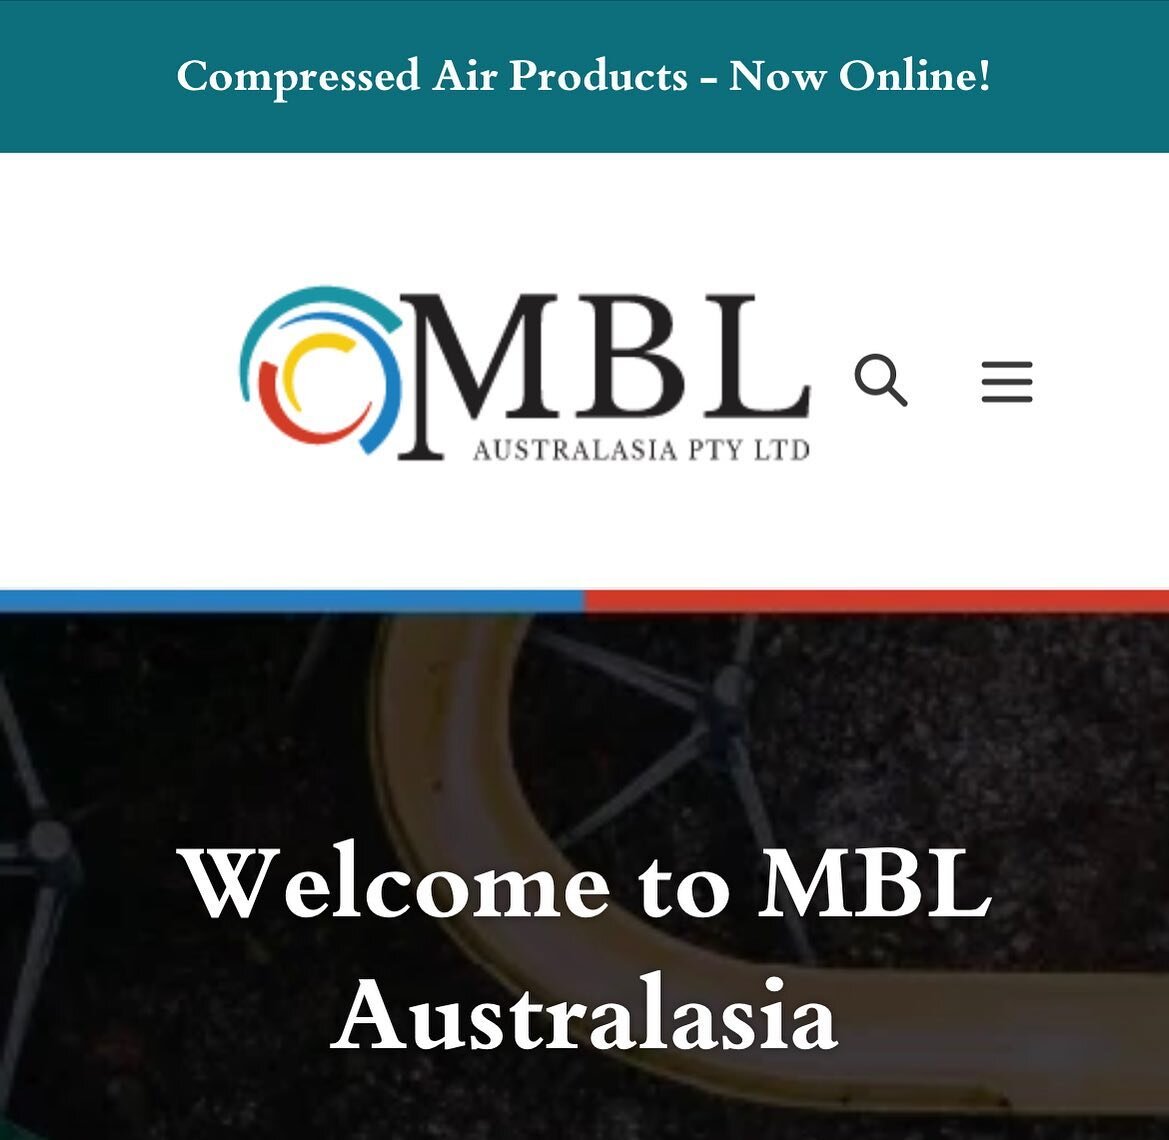 So excited to finally get around to announcing the launch of our latest project. SoftCopy worked together with MBL Australasia to create a full branding exercise complete with logo and fully customised Shopify website. If you're in the market for Wat